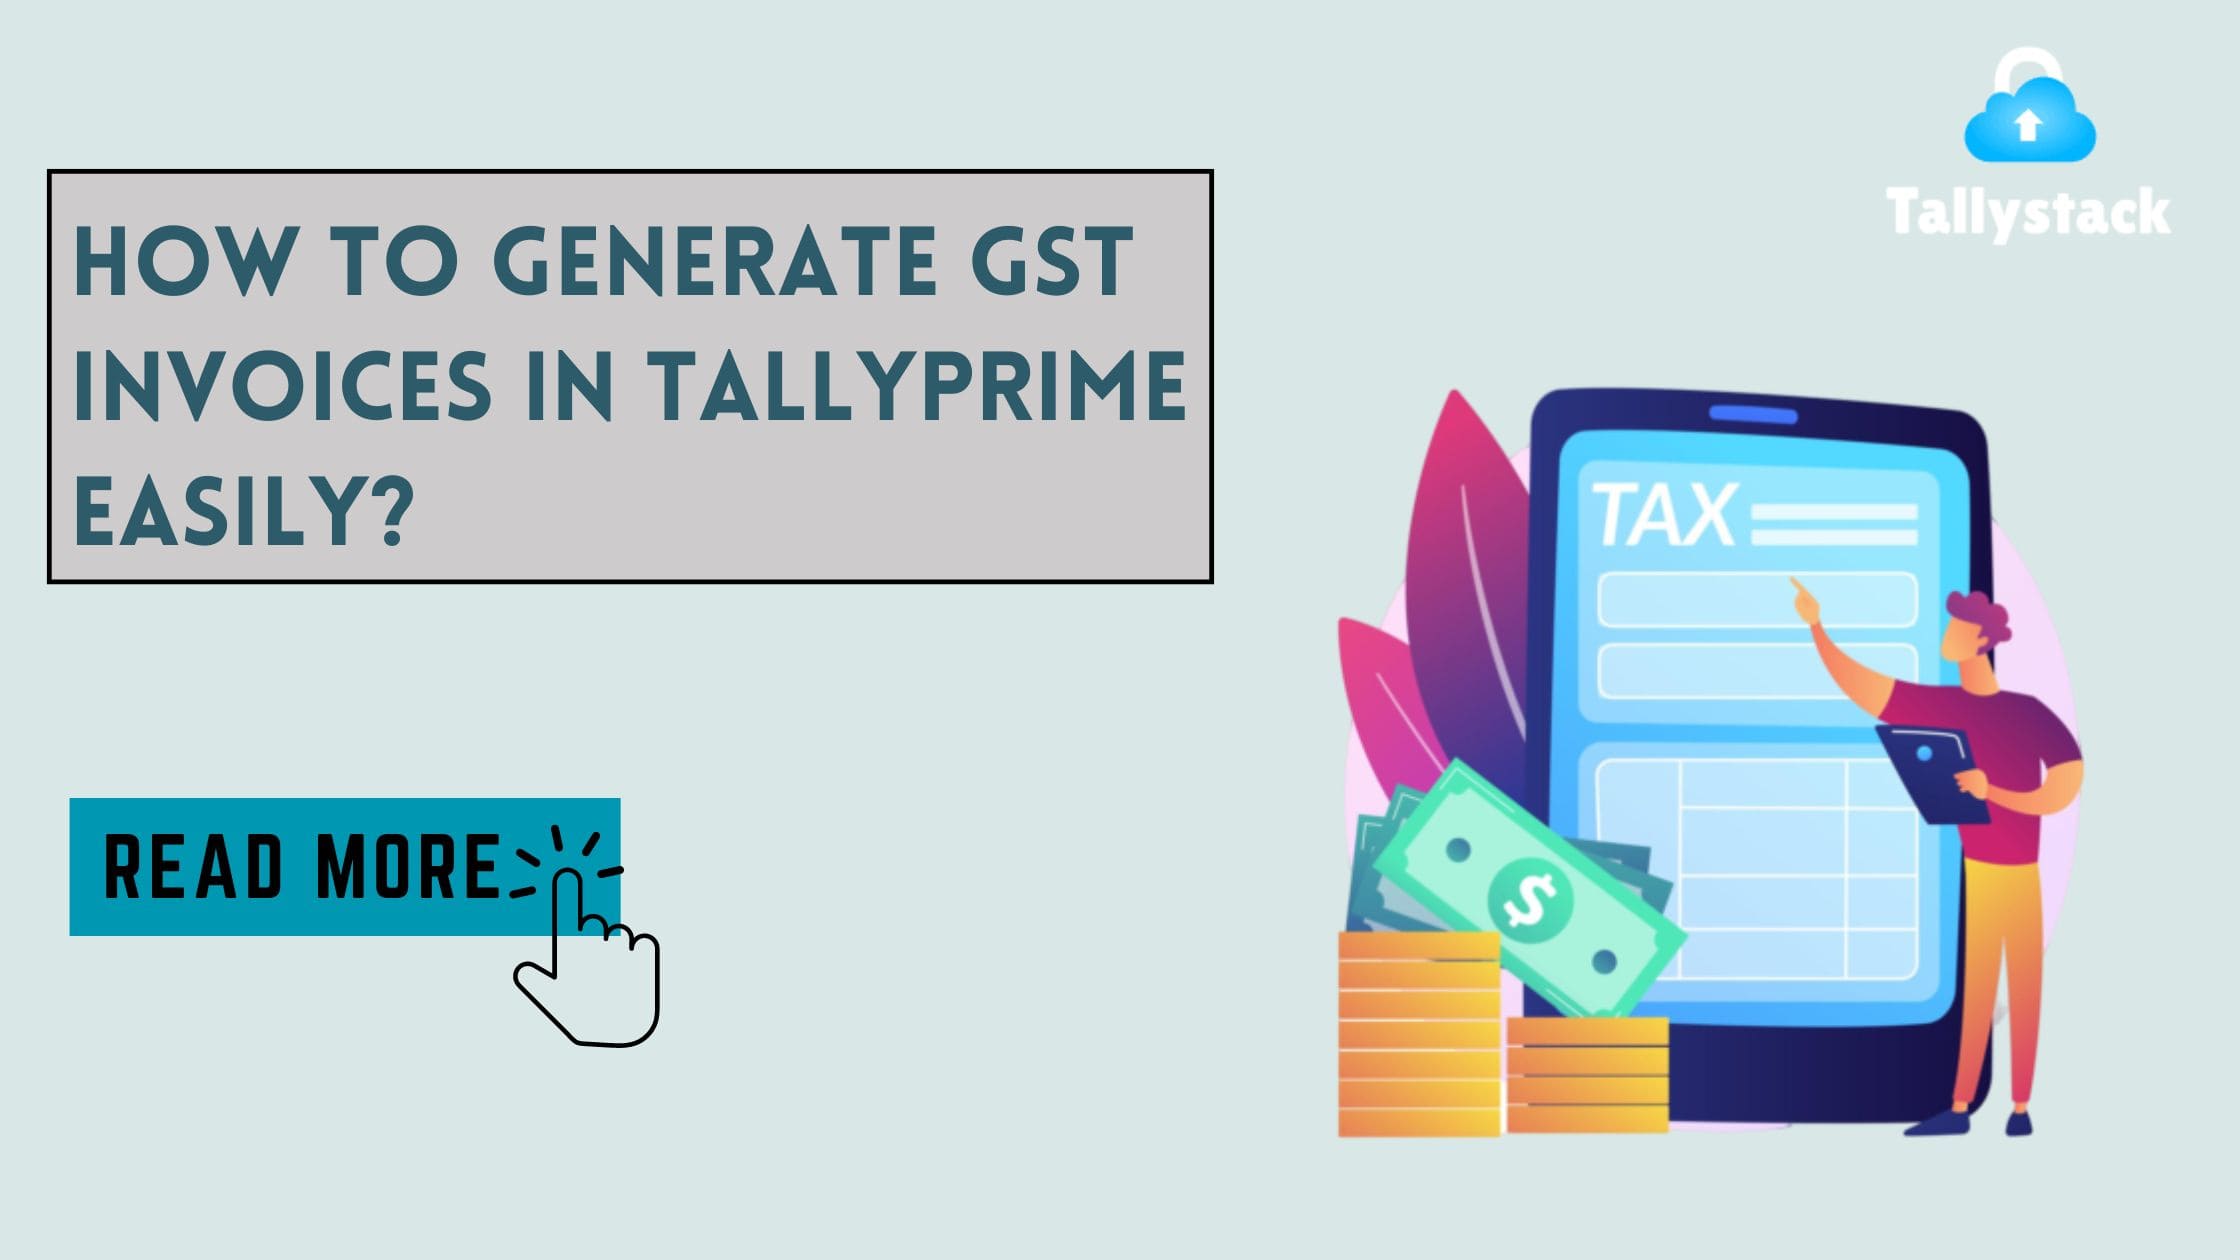 Generating GST invoices in TallyPrime is a task that many businesses find necessary but often complex.